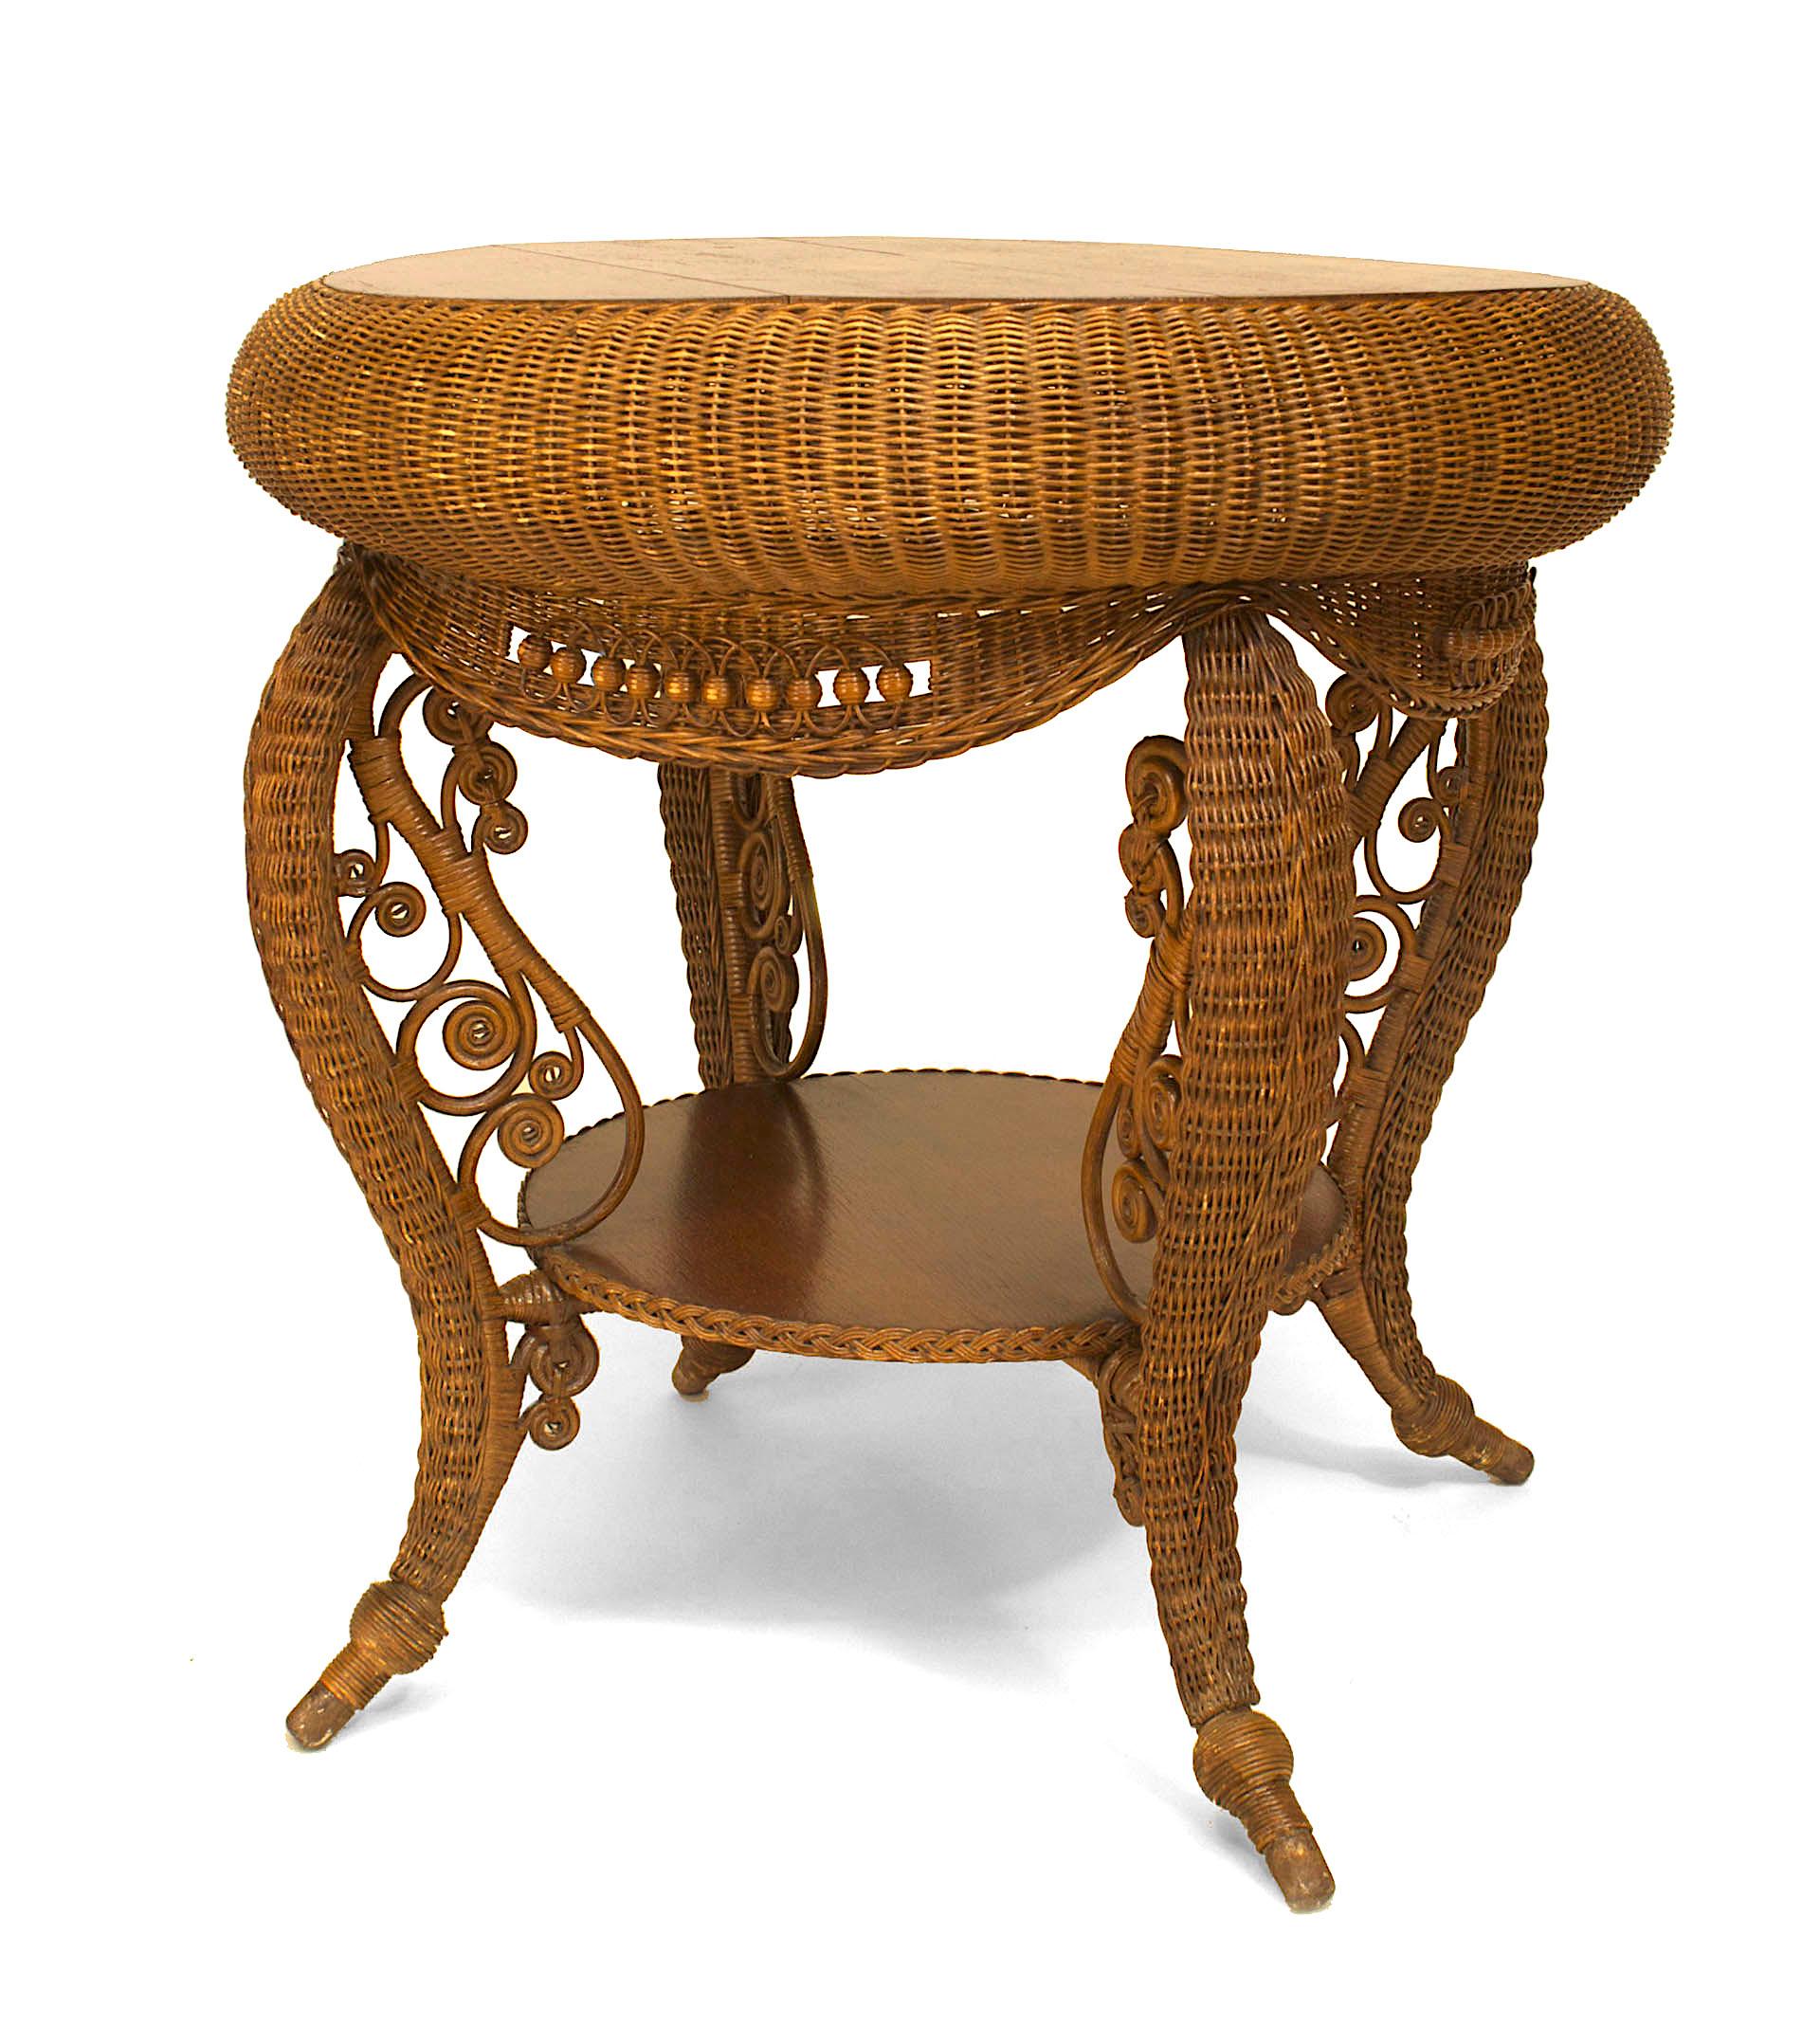 American natural wicker round oak top table with woven apron with spool trim and shaped legs with scrolls connected with a shelf (HEYWOOD-WAKEFIELD paper label)